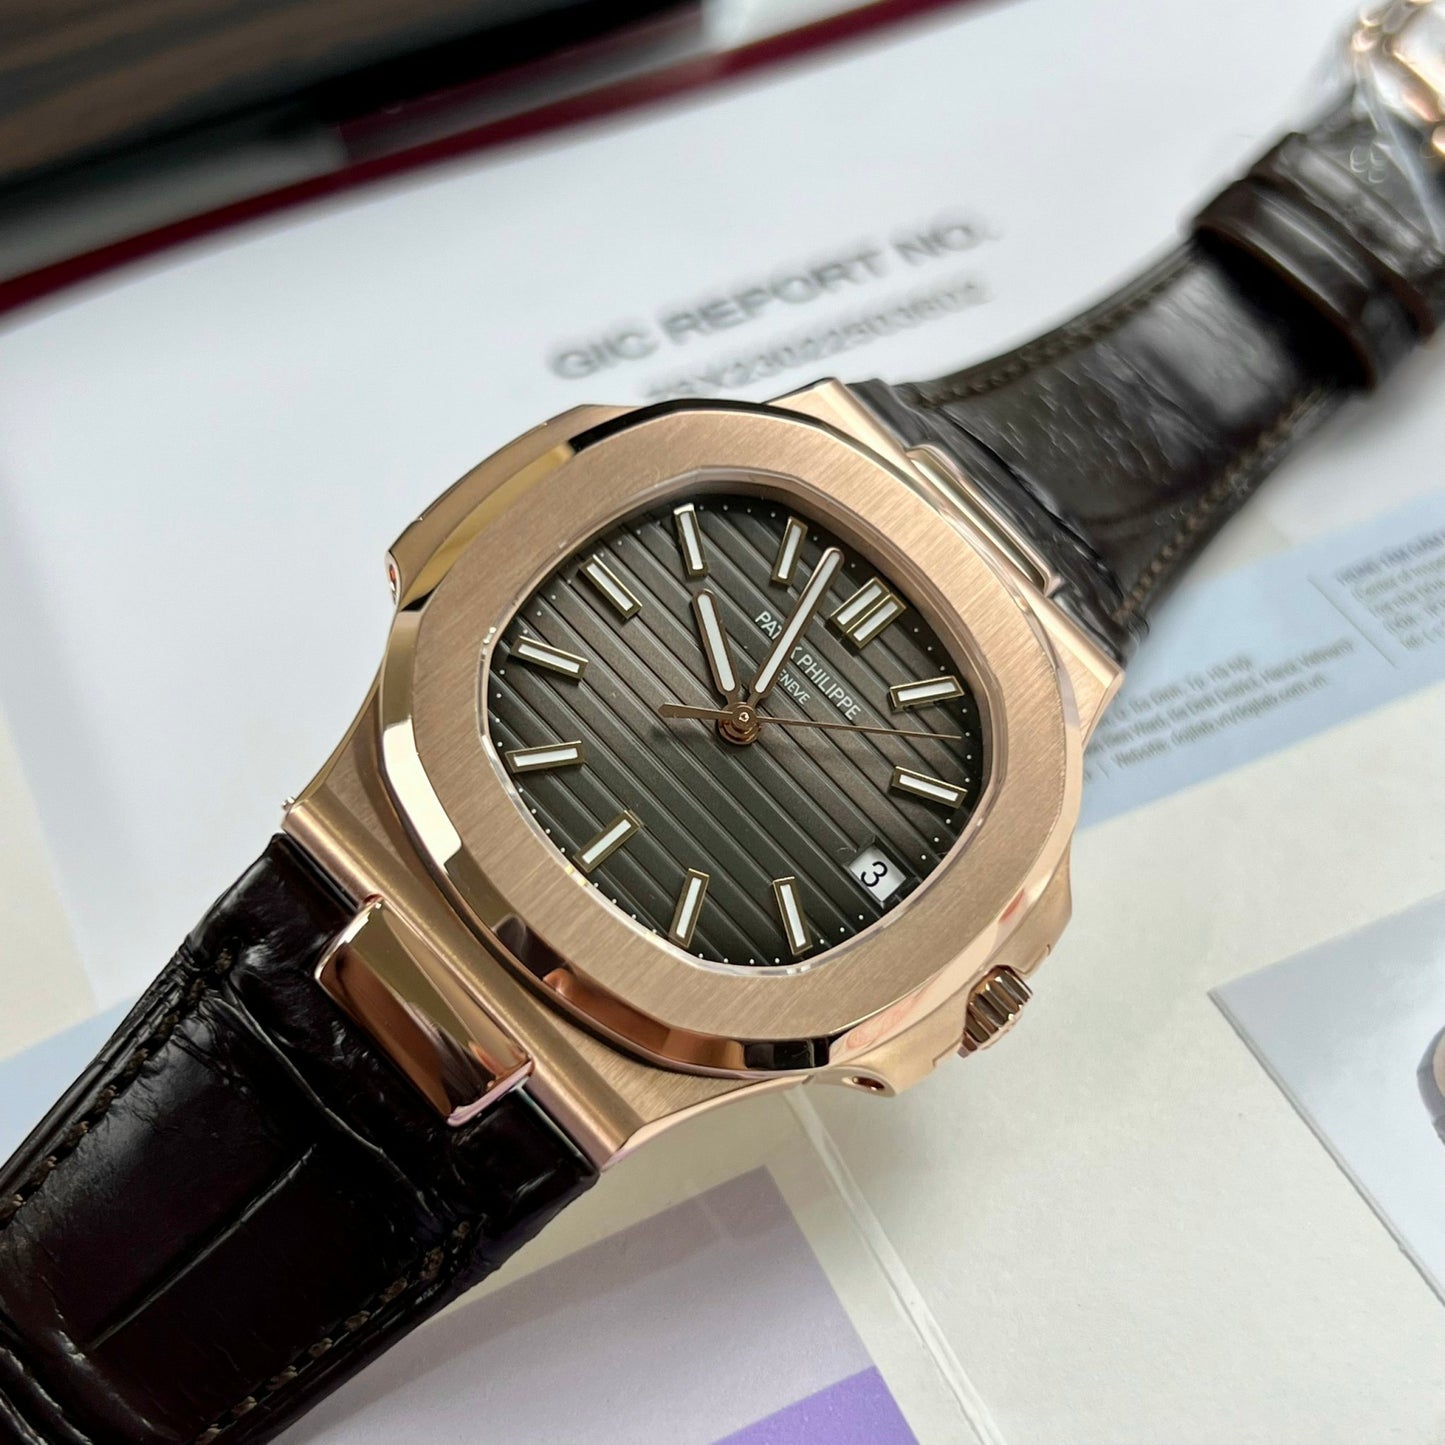 Patek Philippe Nautilus 5711/1R-001 –Wrapped 18k rose gold Leather band version